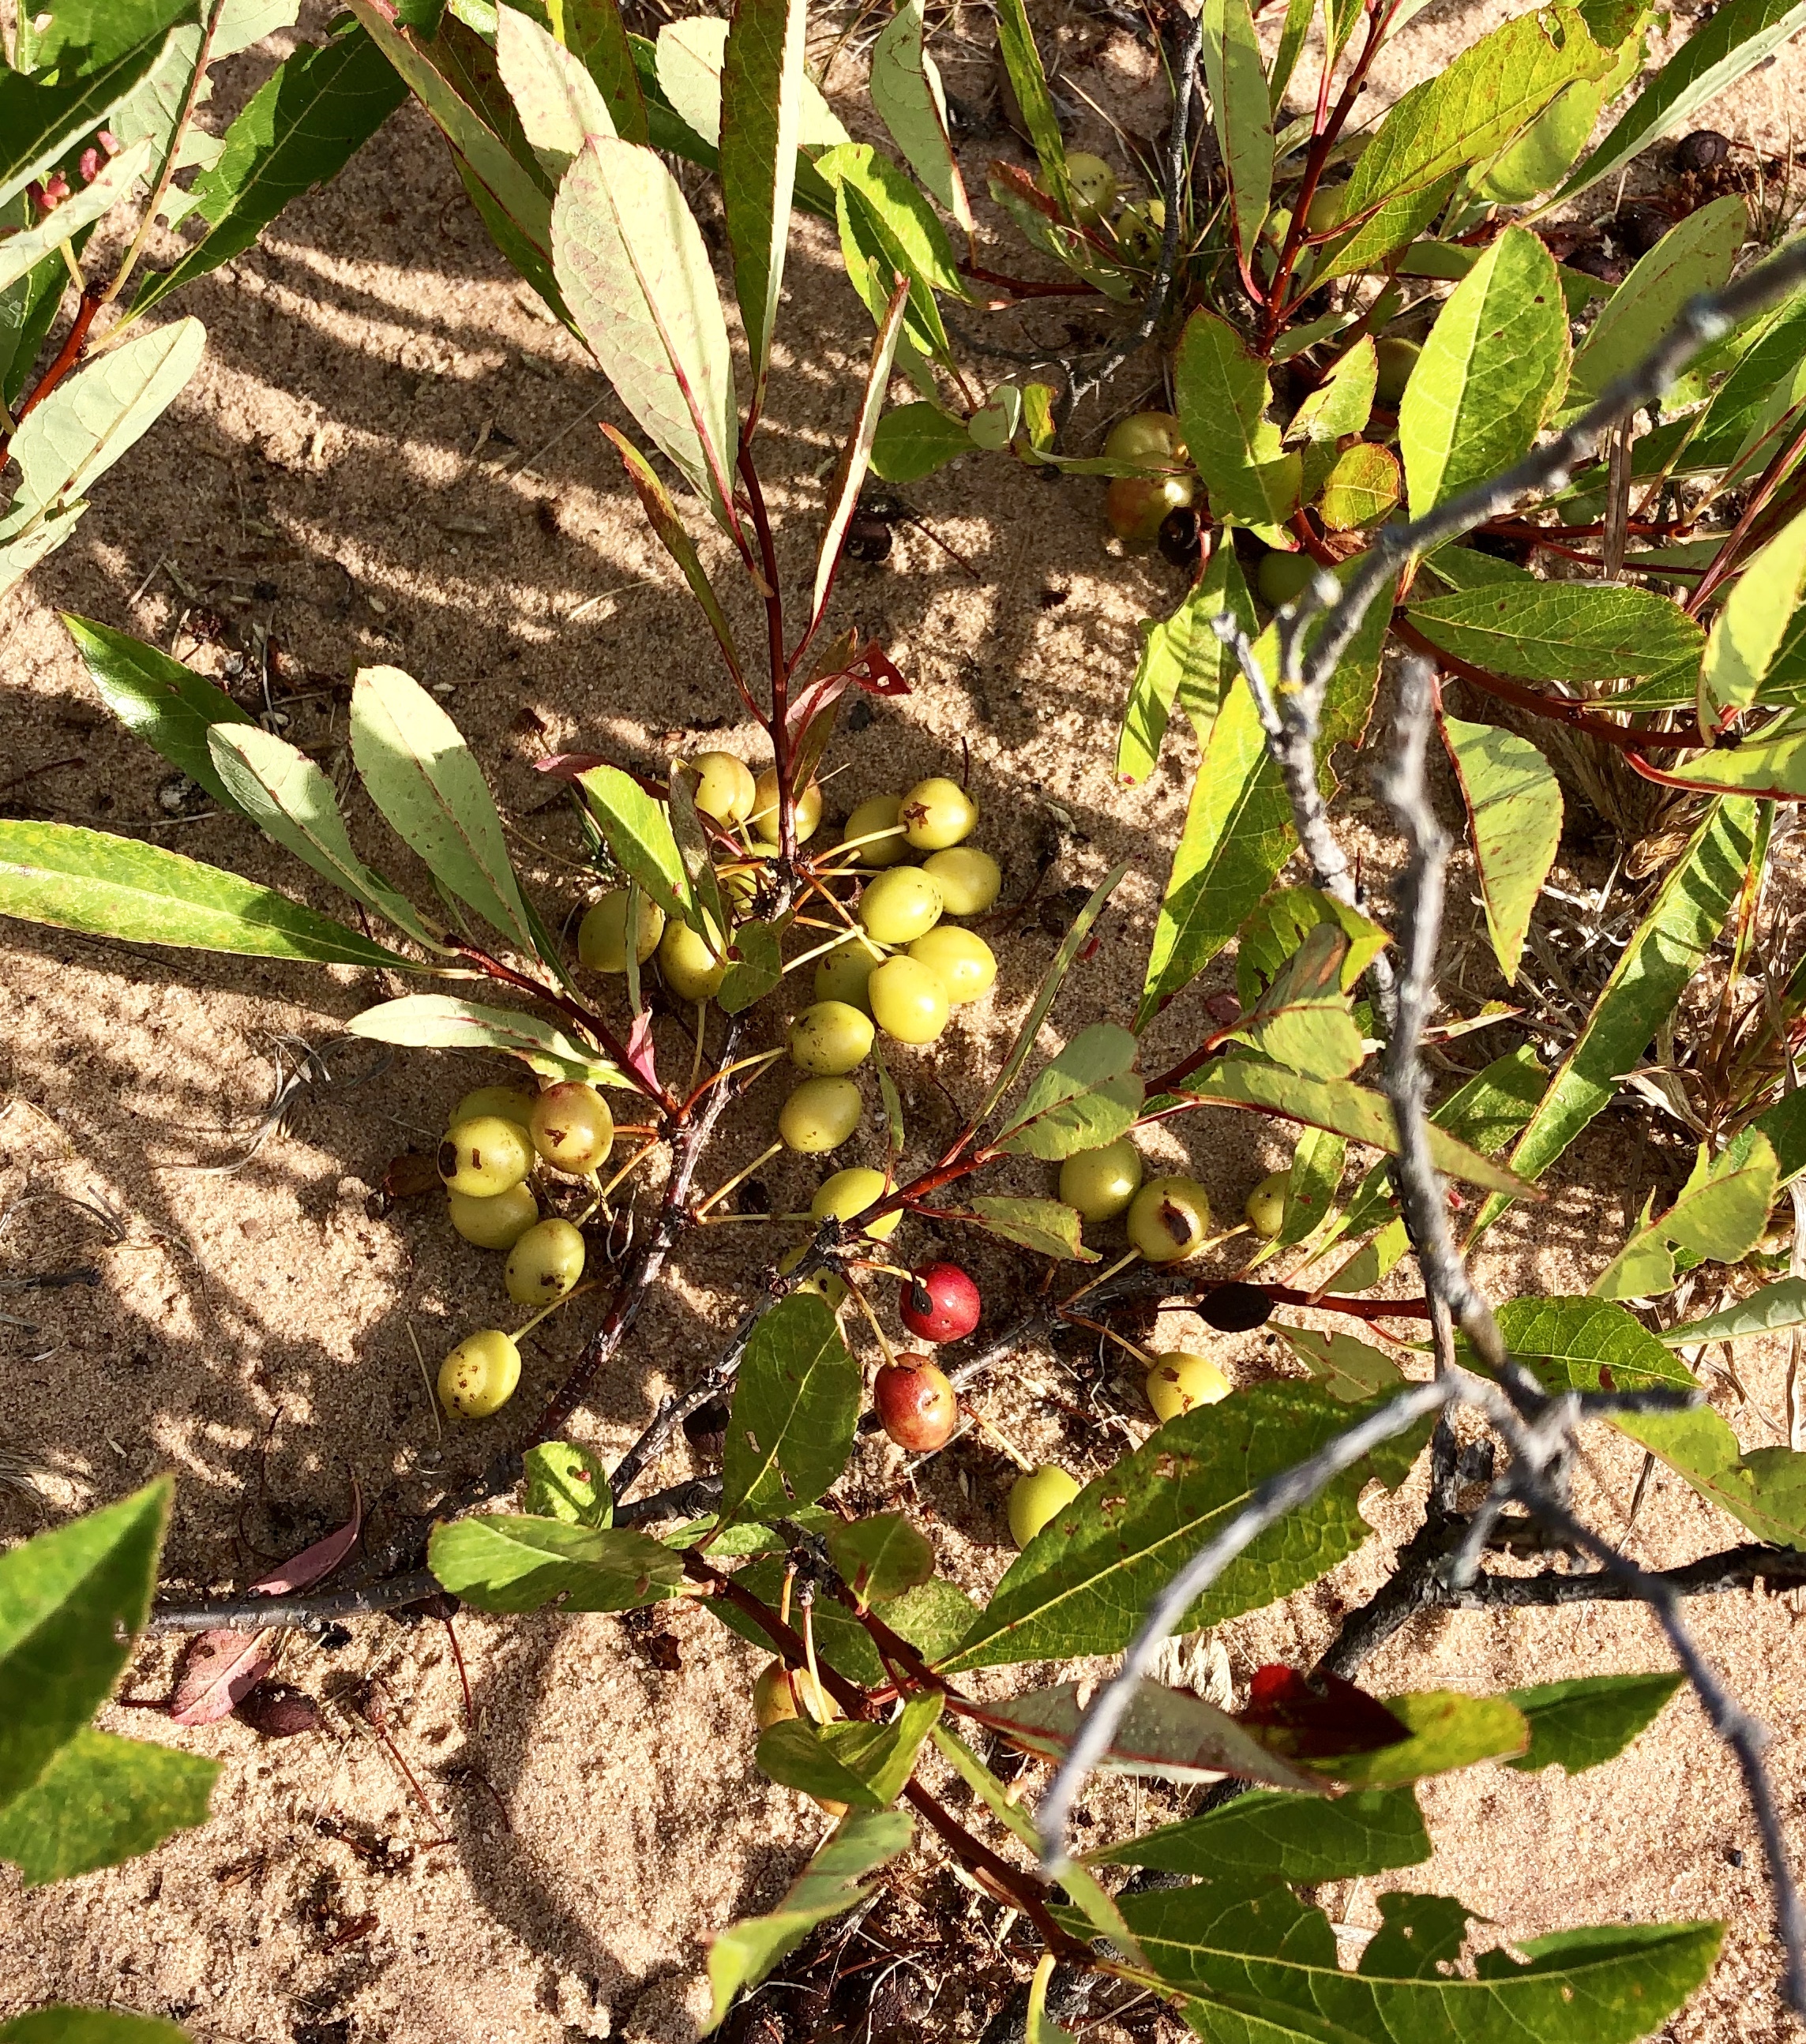 Prunus pumila (Sand Cherry) growing in sandy soil. Most of the cherries are unripe and are yellowish-green in color. Two are red.